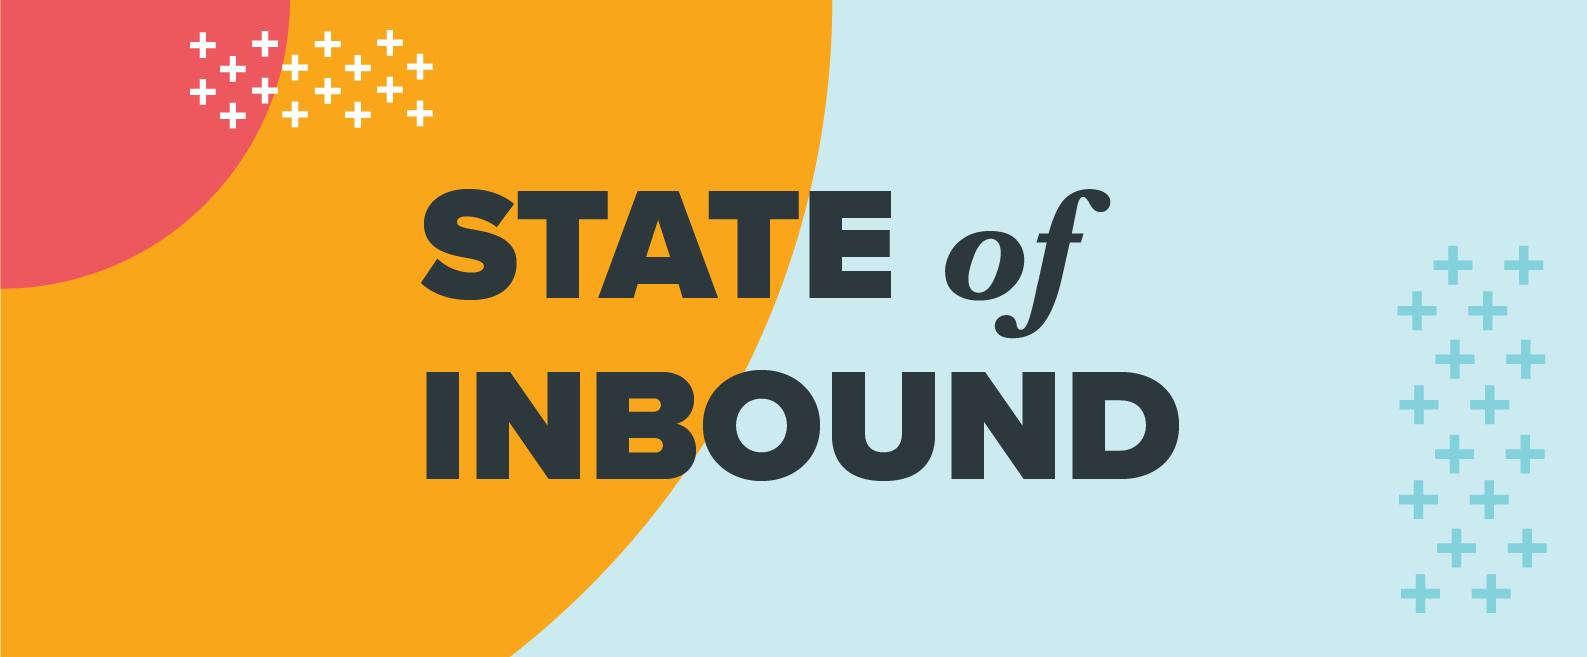 State of Inbound 2017: Your Go-To Business Report for Marketing and Sales Research [New Data]